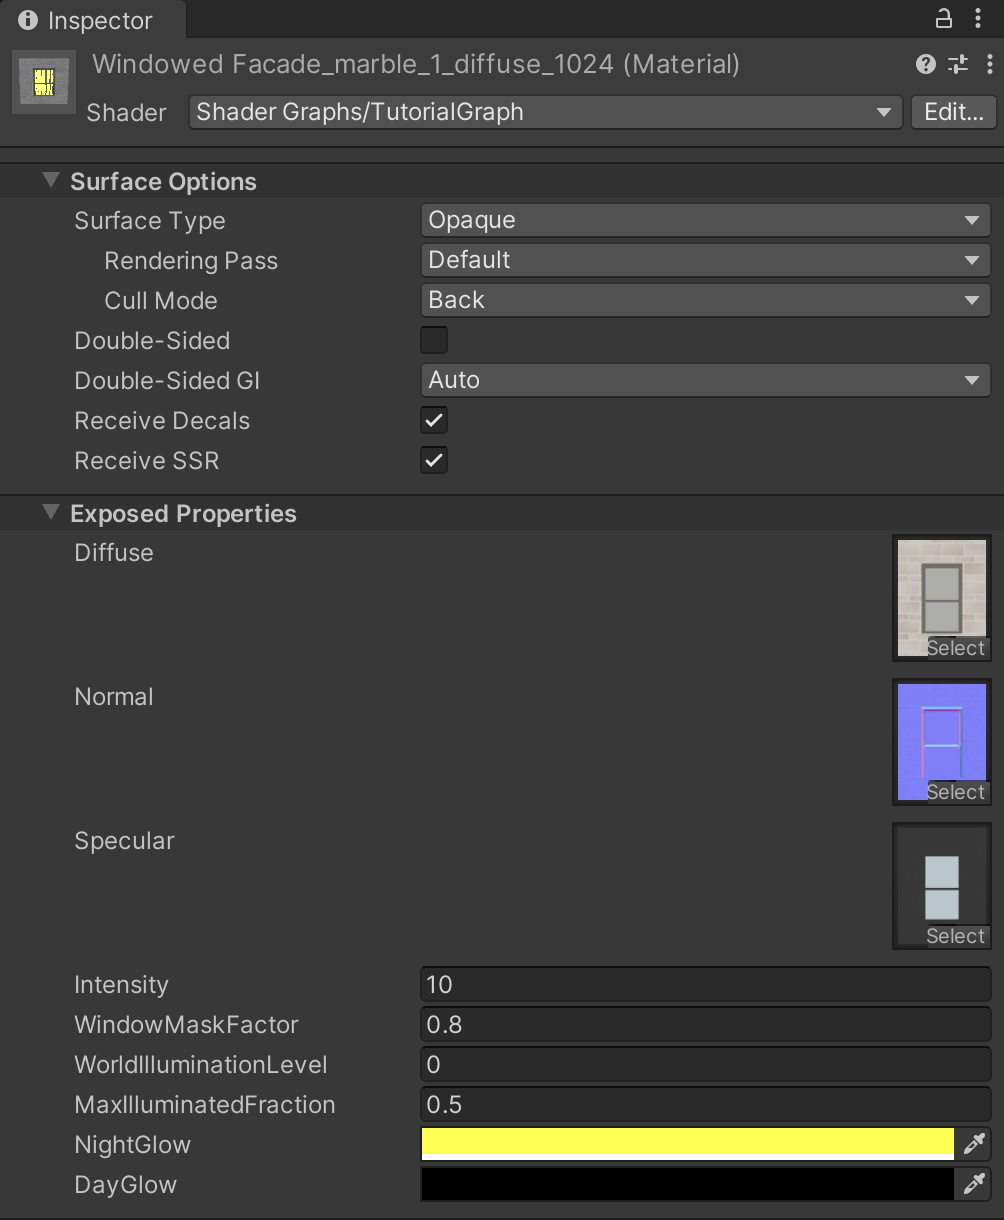 A material configured with the shader and properties as described above.